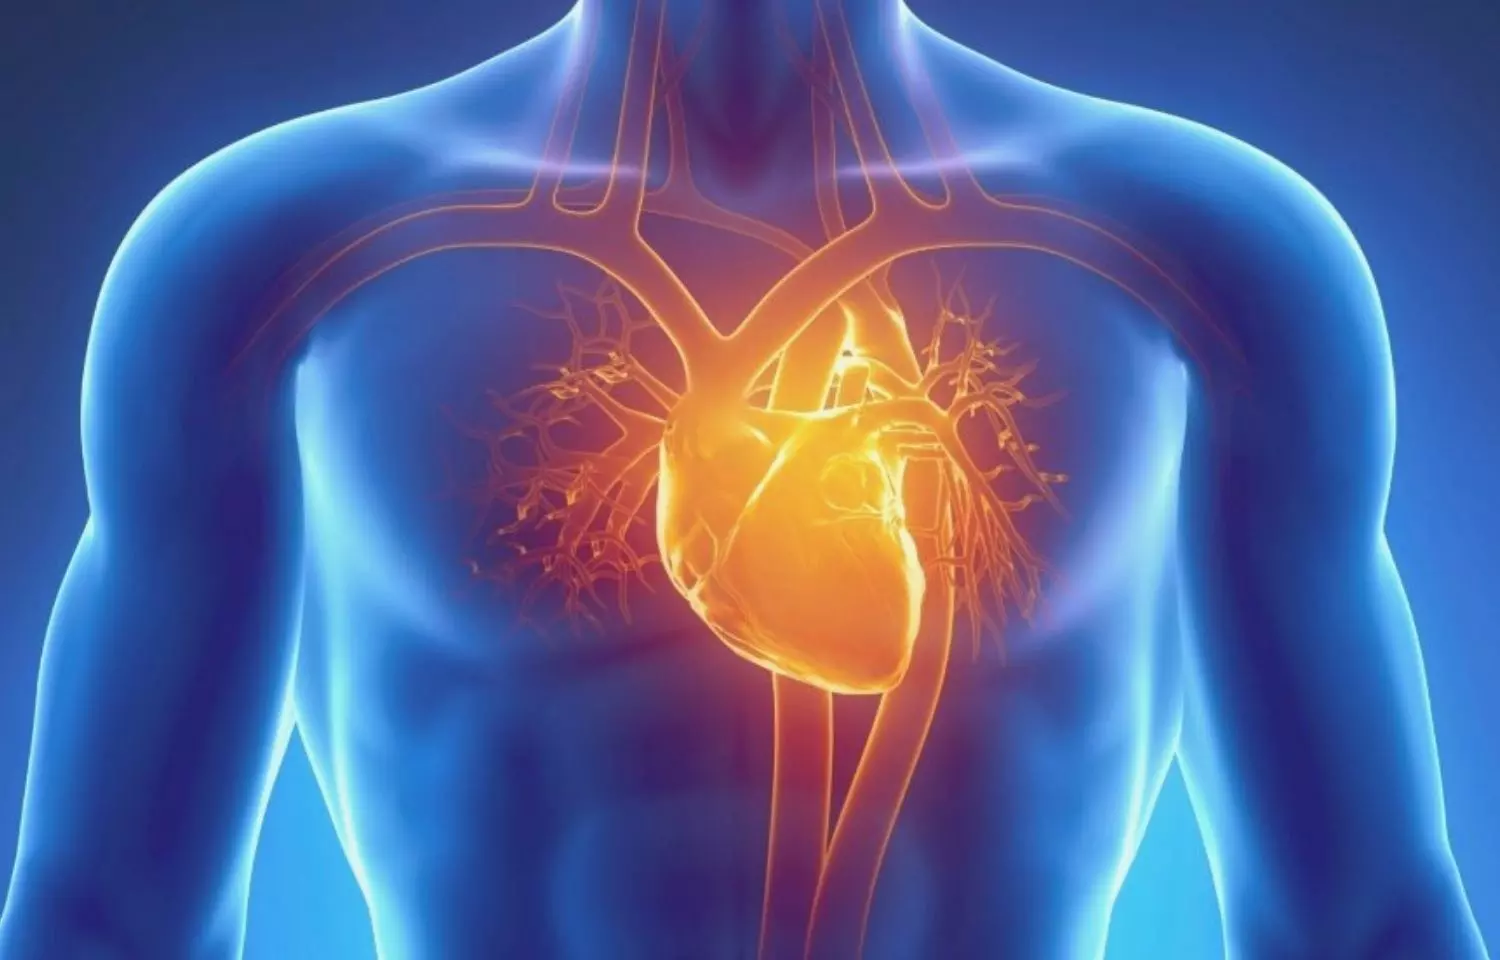 CT safer option than invasive coronary angiography for patients with stable chest pain: NEJM